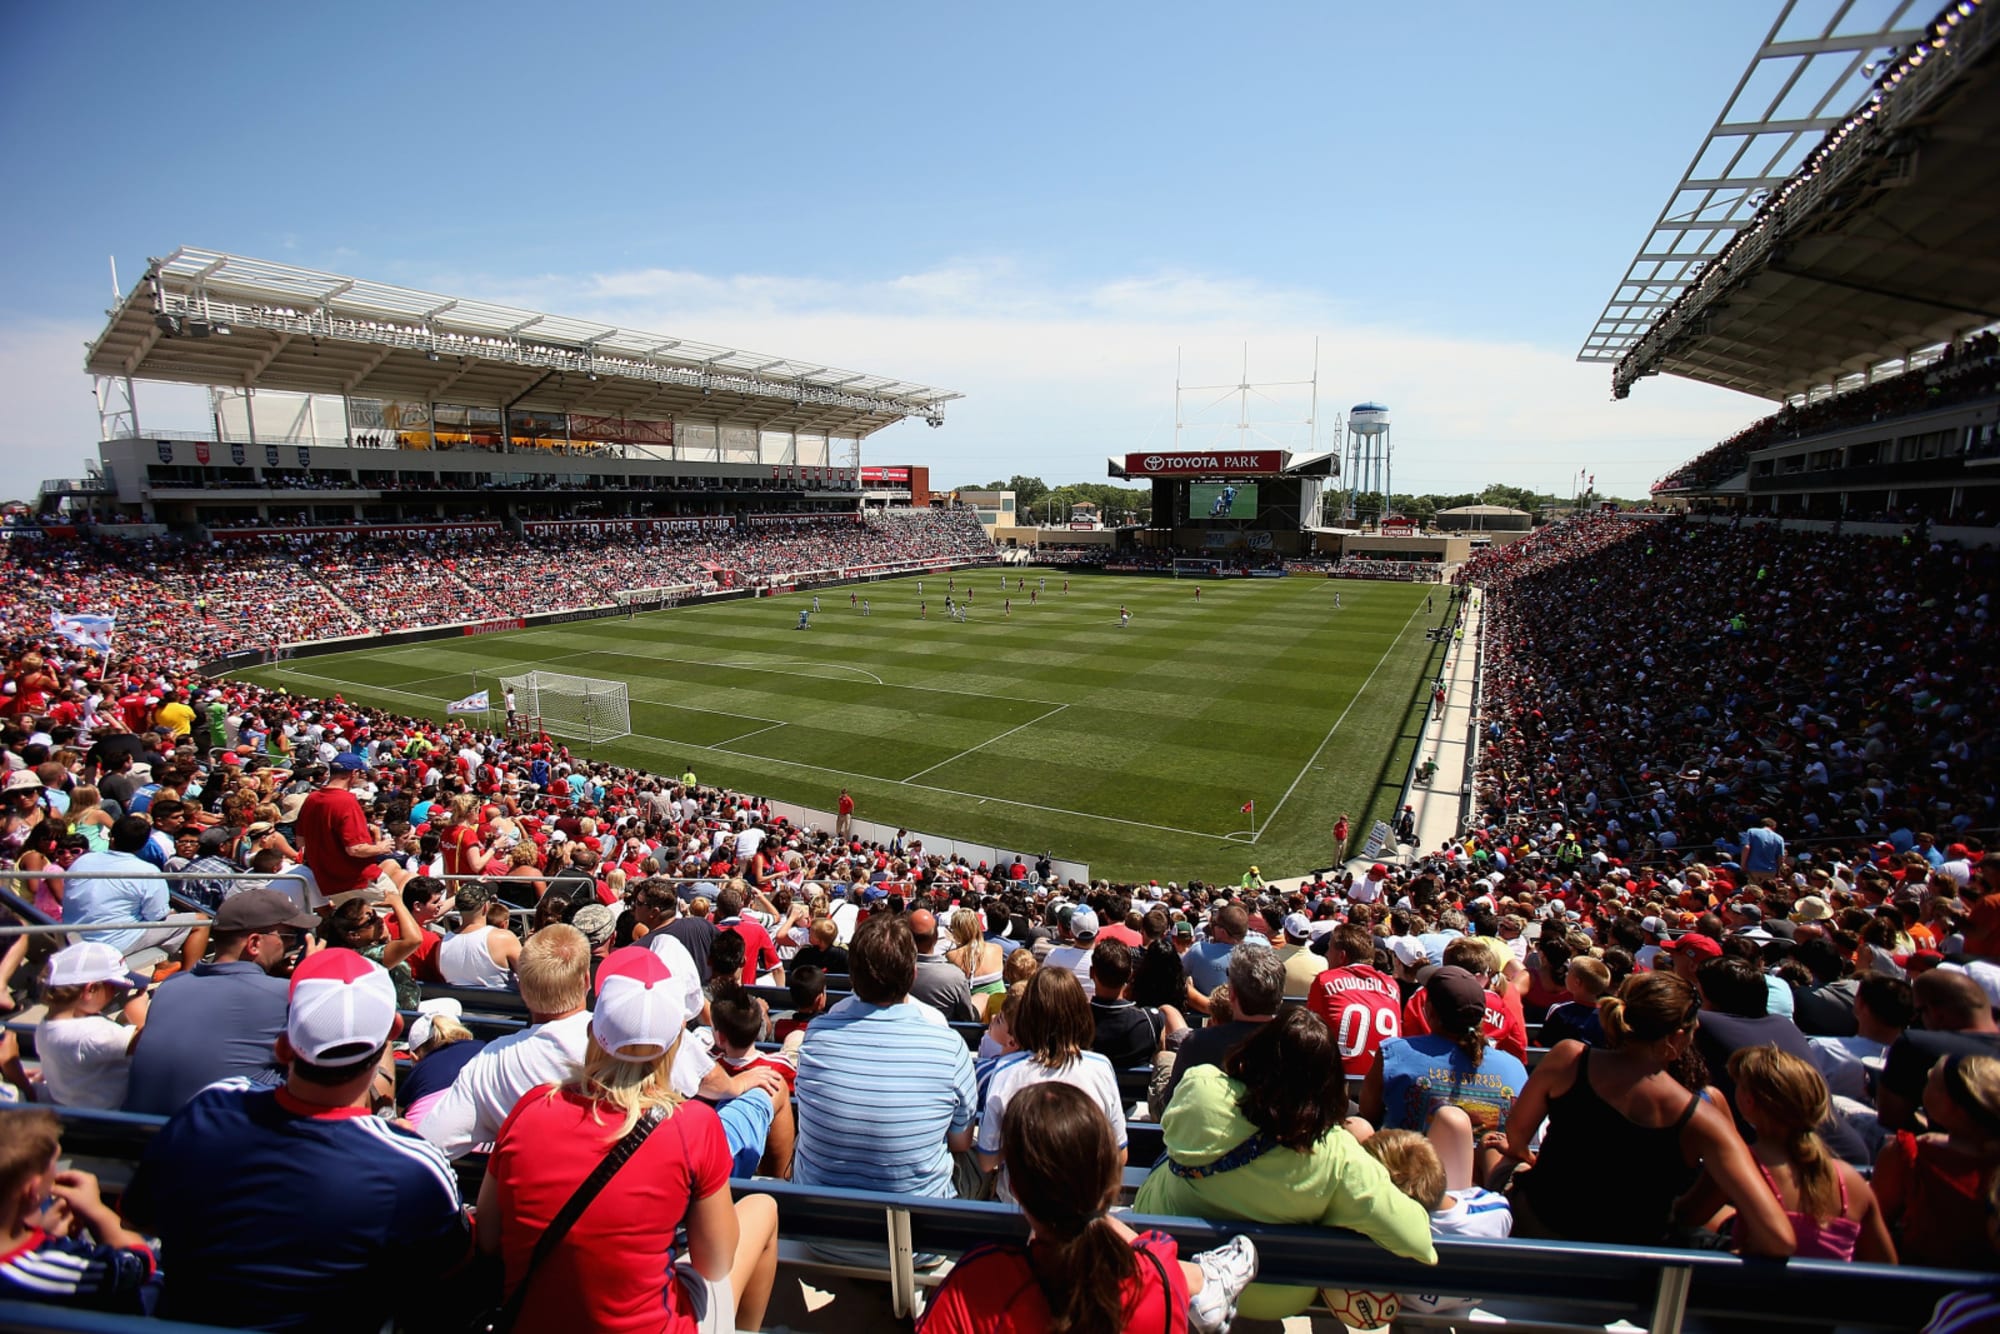 Chicago Fire FC Reports Robust Sales for Soldier Field Homecoming